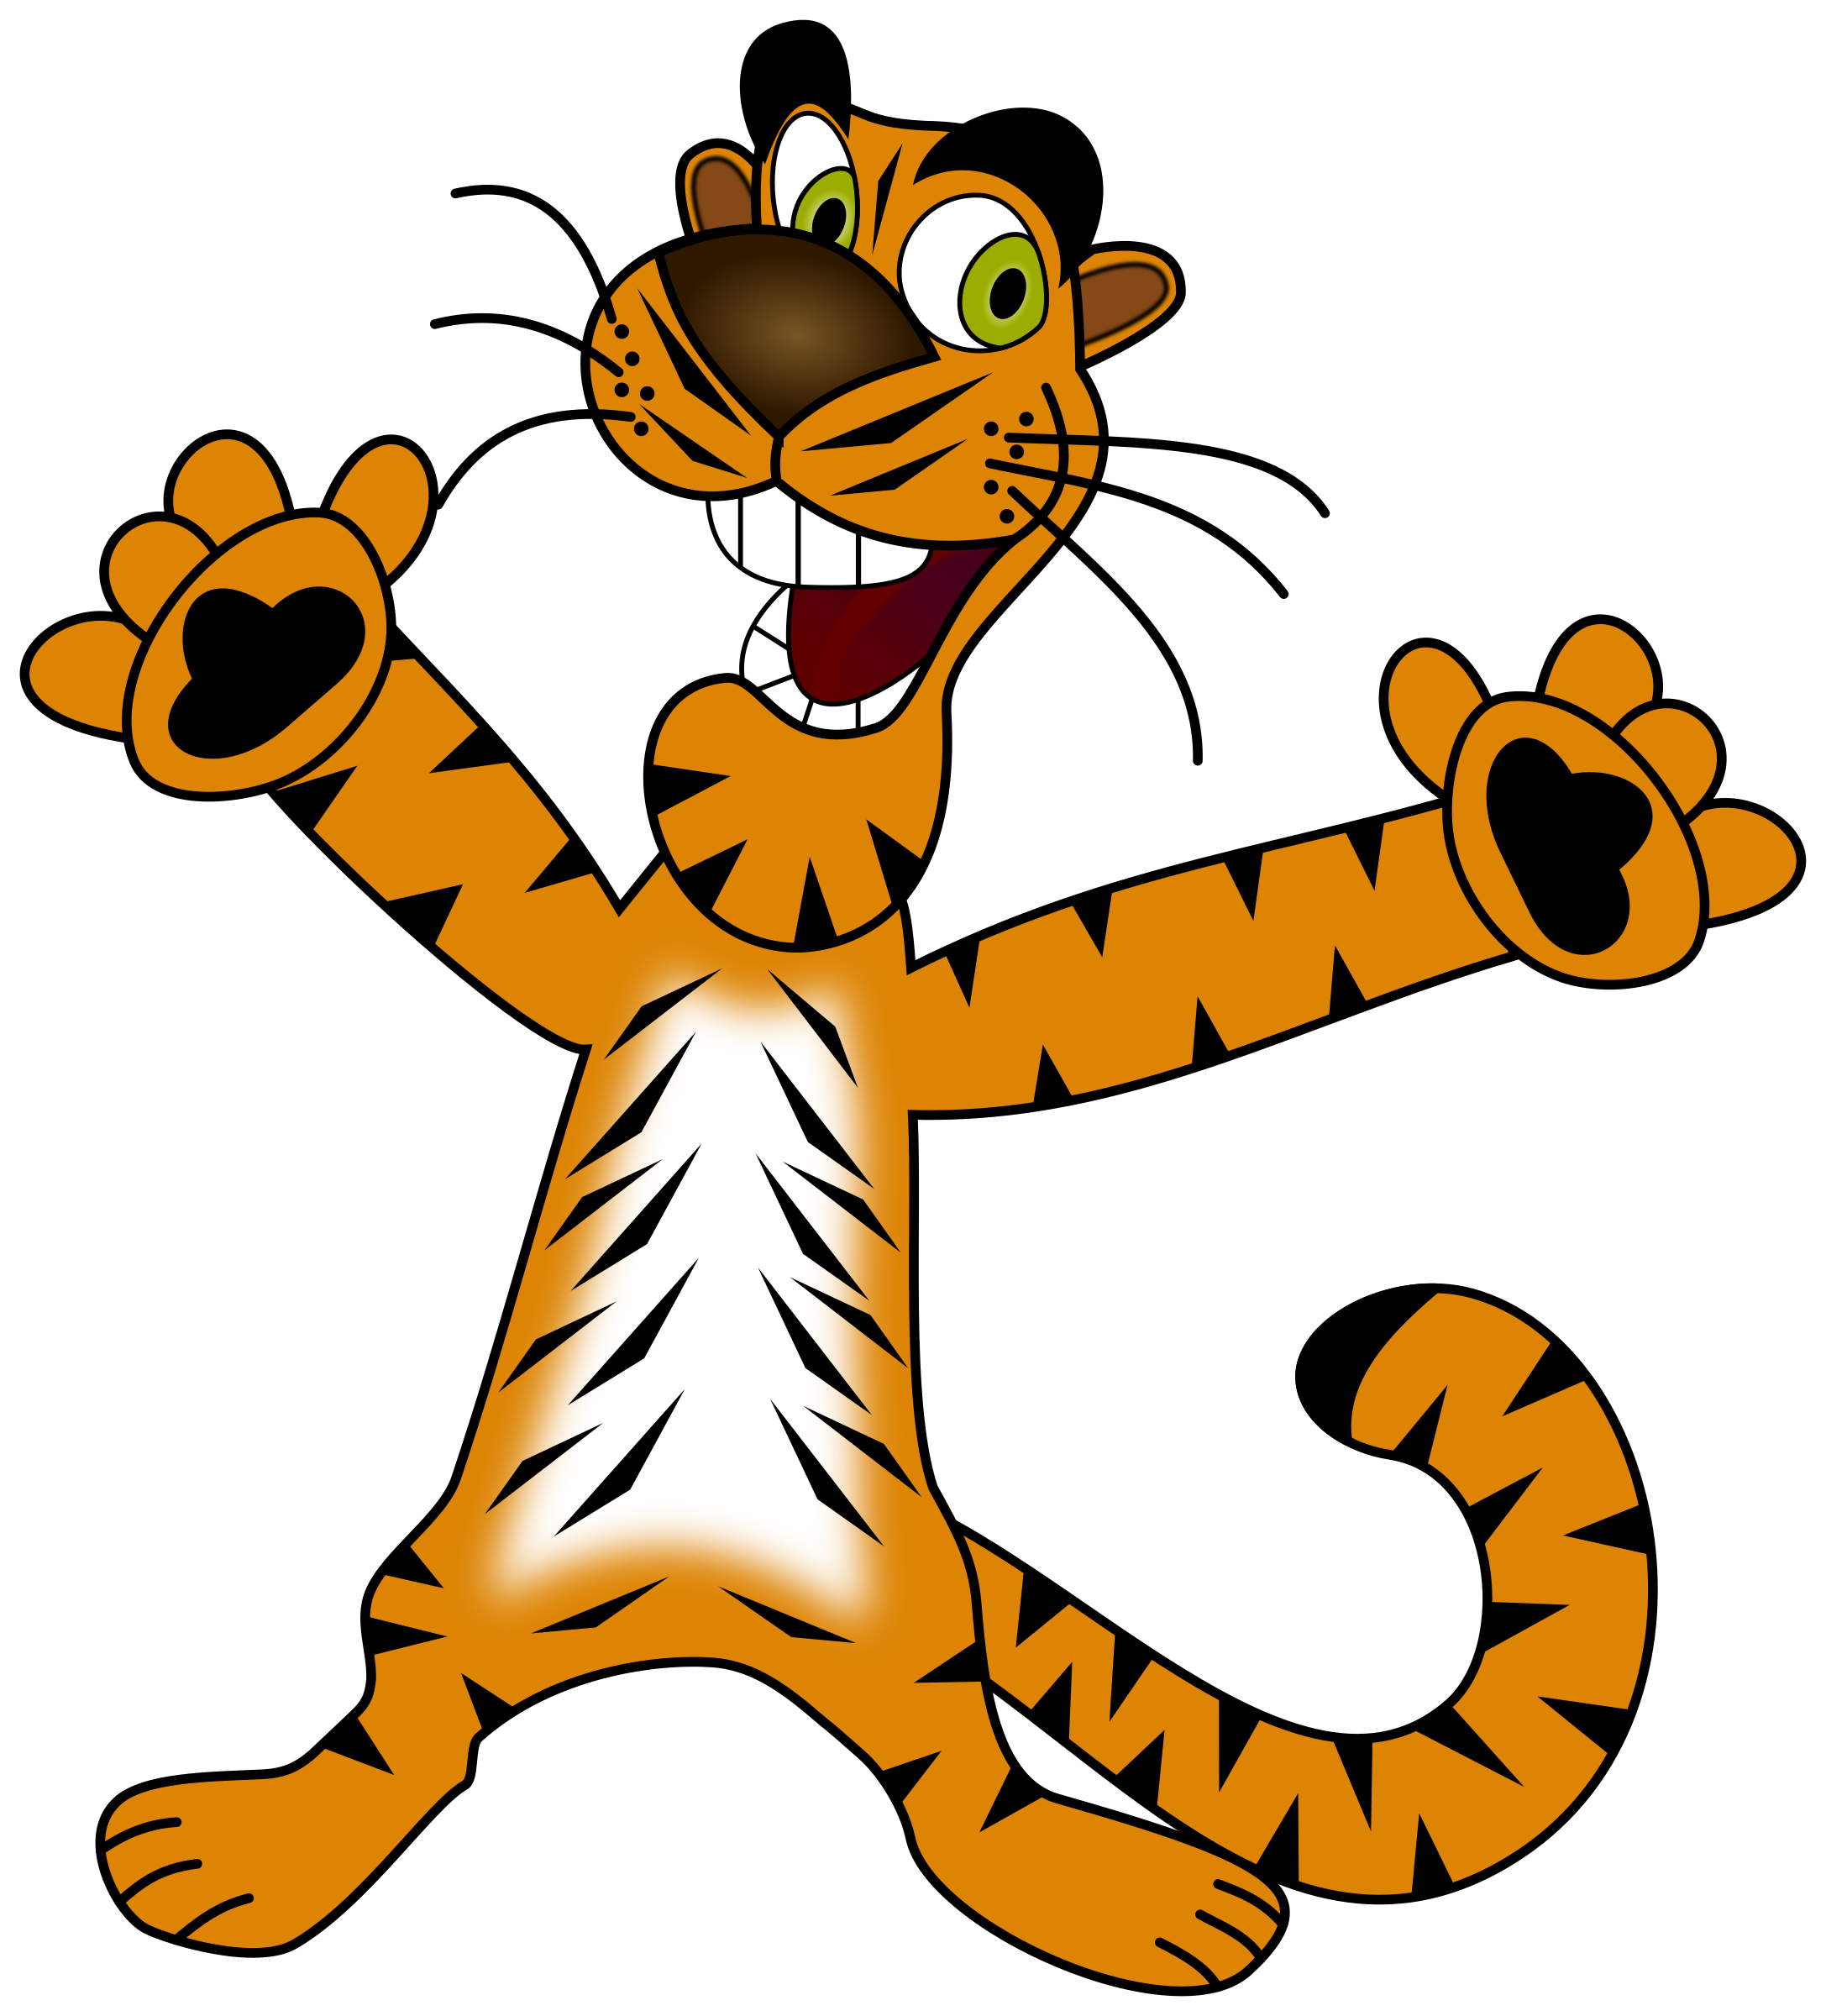 Tiger funny pencil and. Nature clipart animal